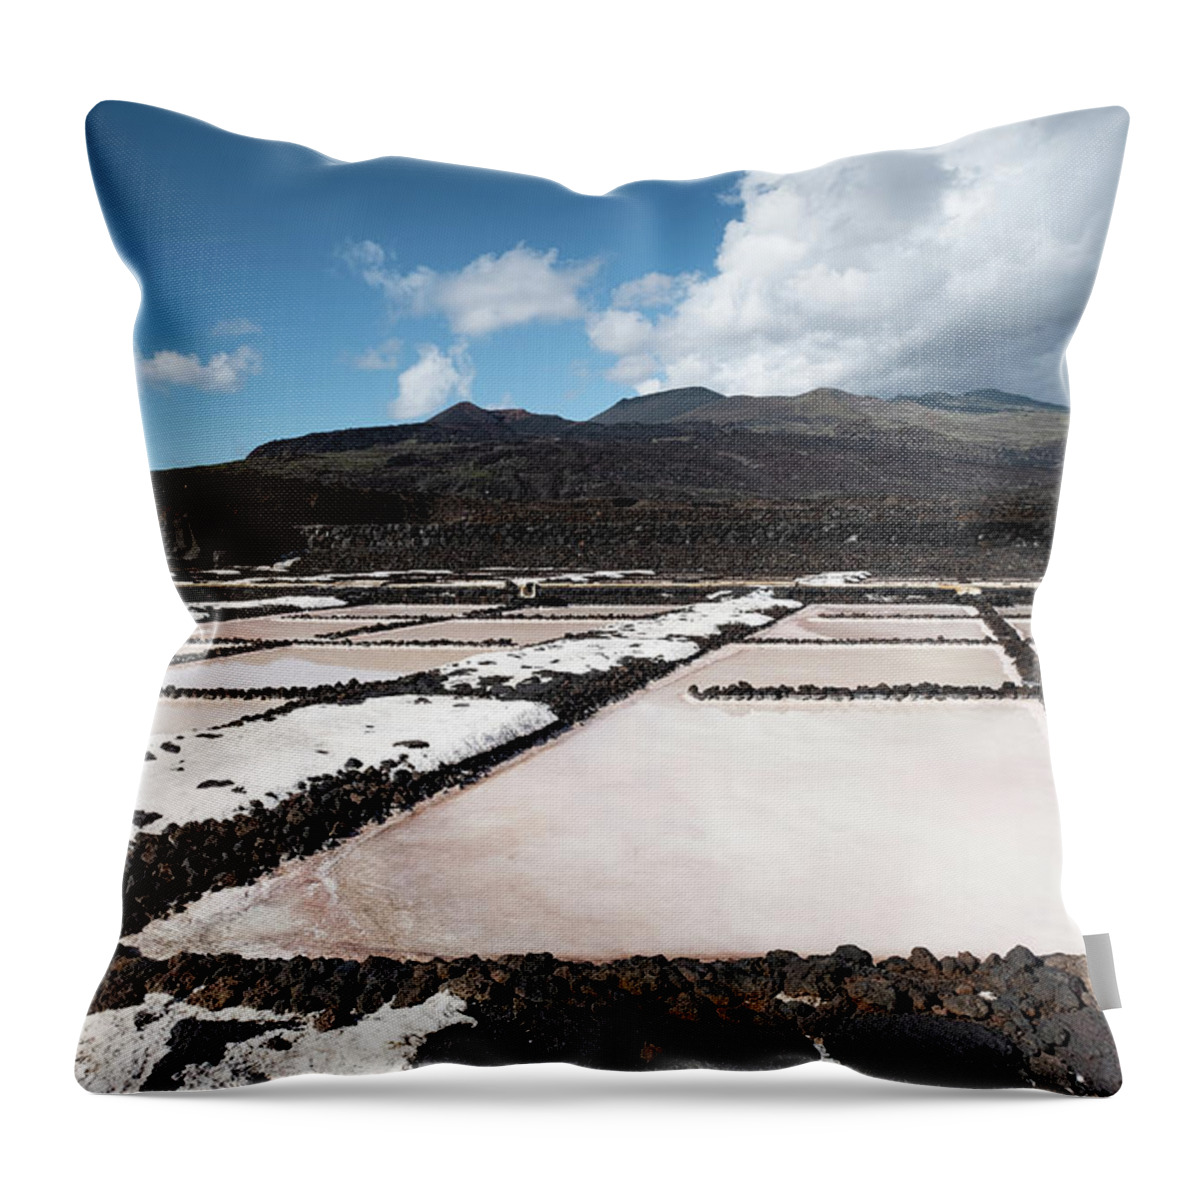 Ip_71316013 Throw Pillow featuring the photograph View Of The Salt Pans At Fuencaliente, In The Background The Volcano Of Tenegua, La Palma, Canary Islands, Spain, Europe by Sonia Aumiller